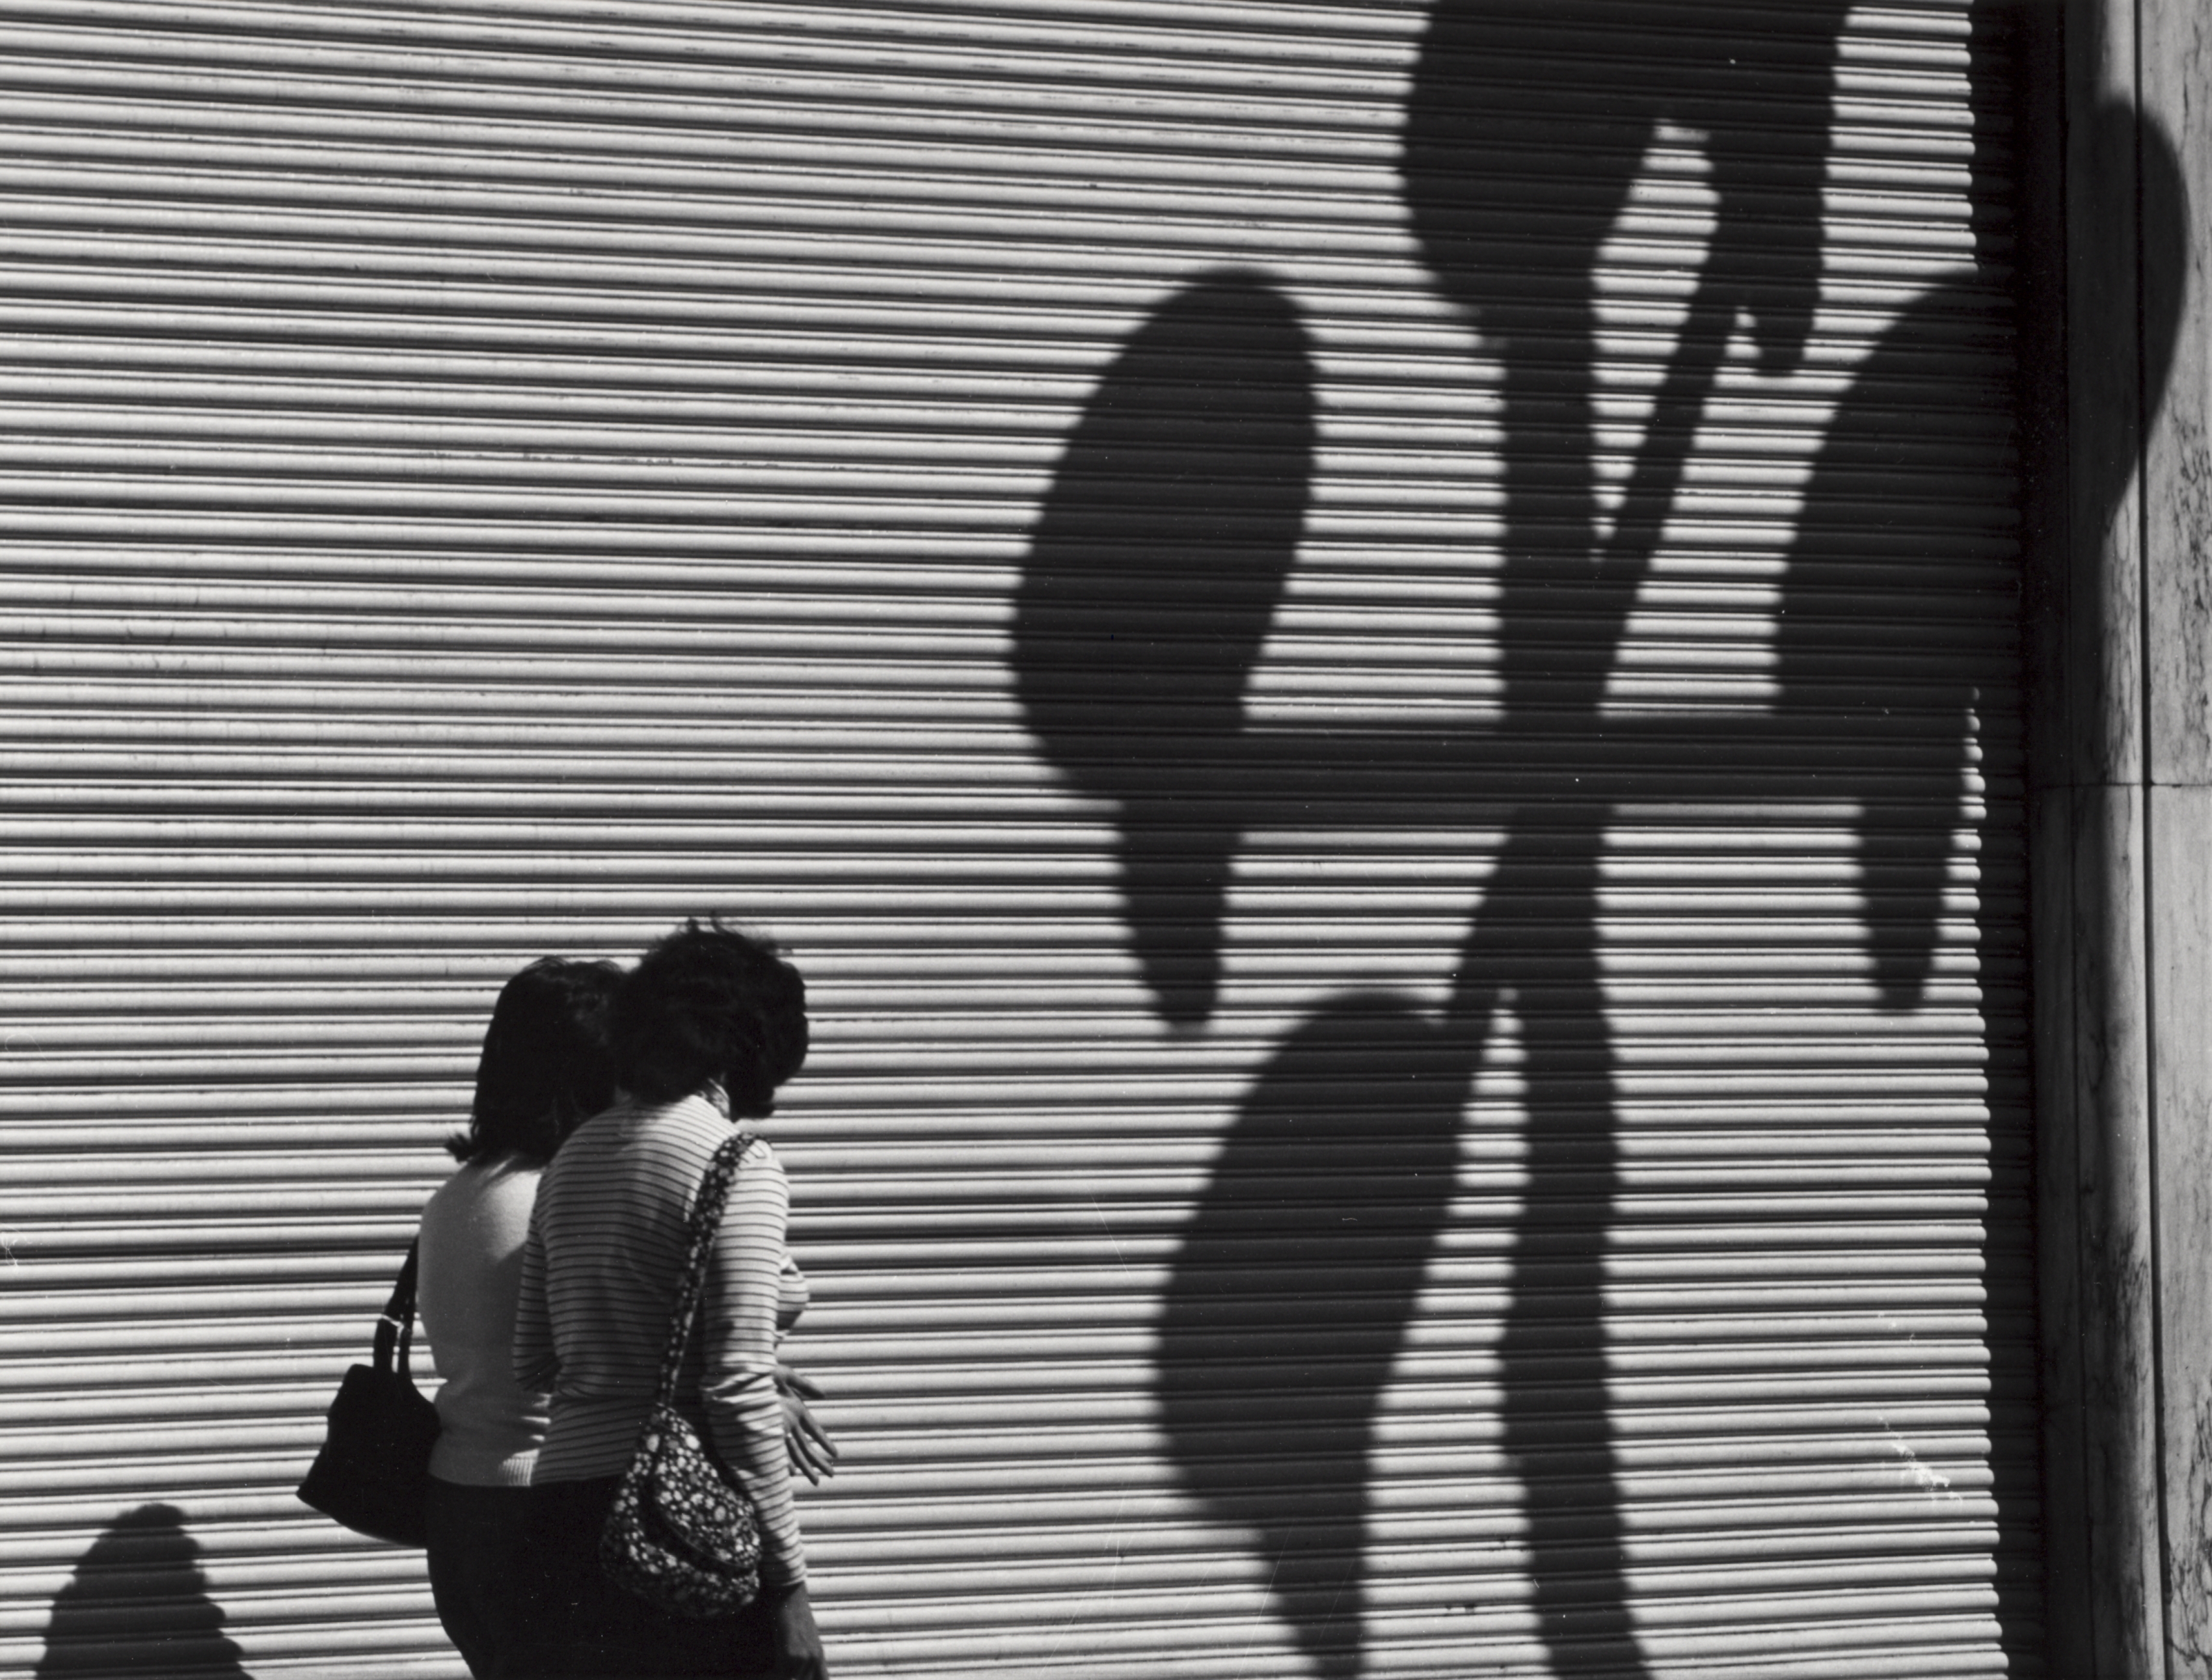 Two Women, a Large Blind, and Shadows